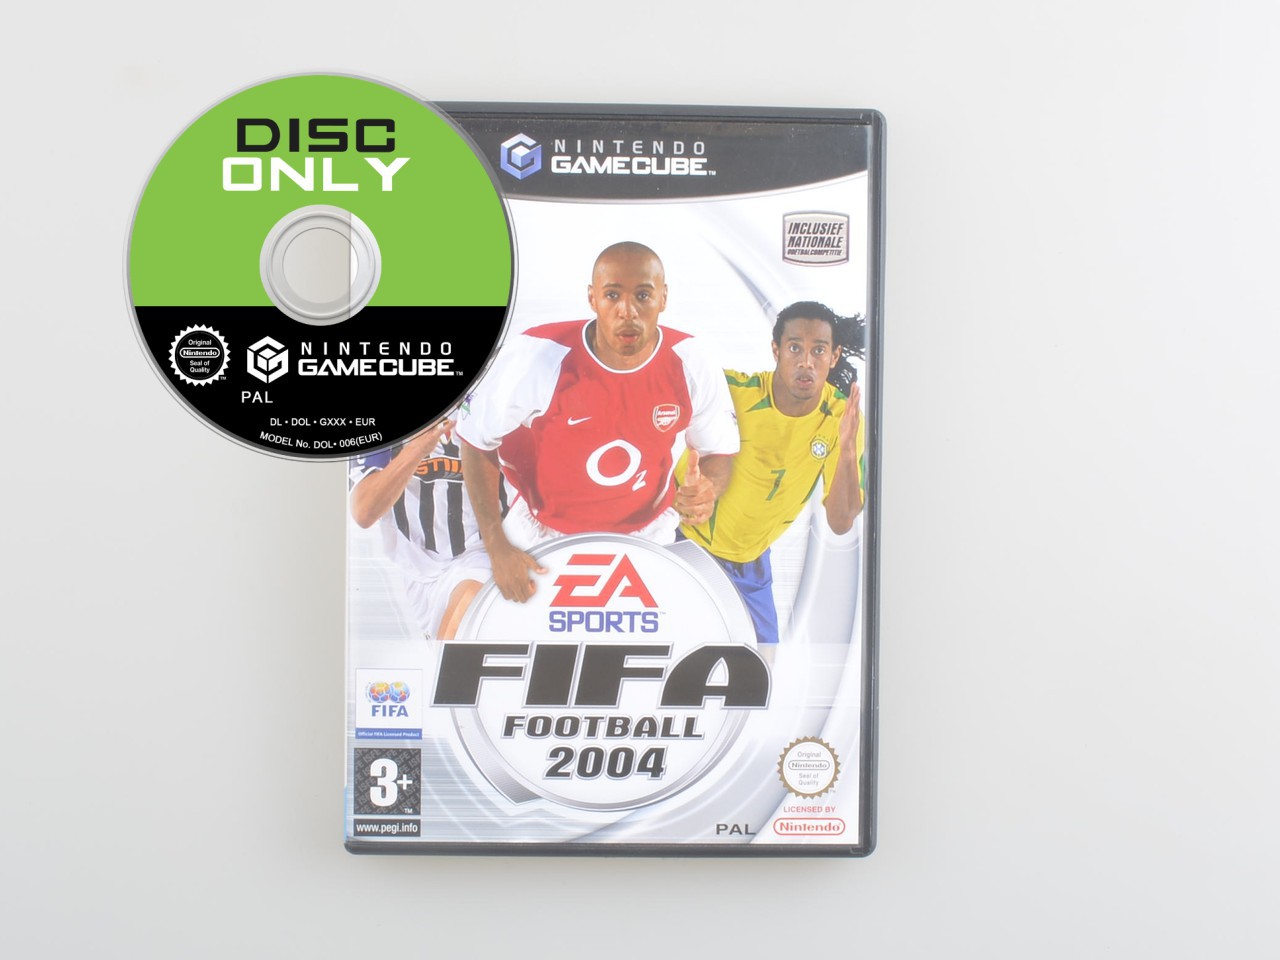 FIFA Football 2004 - Disc Only - Gamecube Games